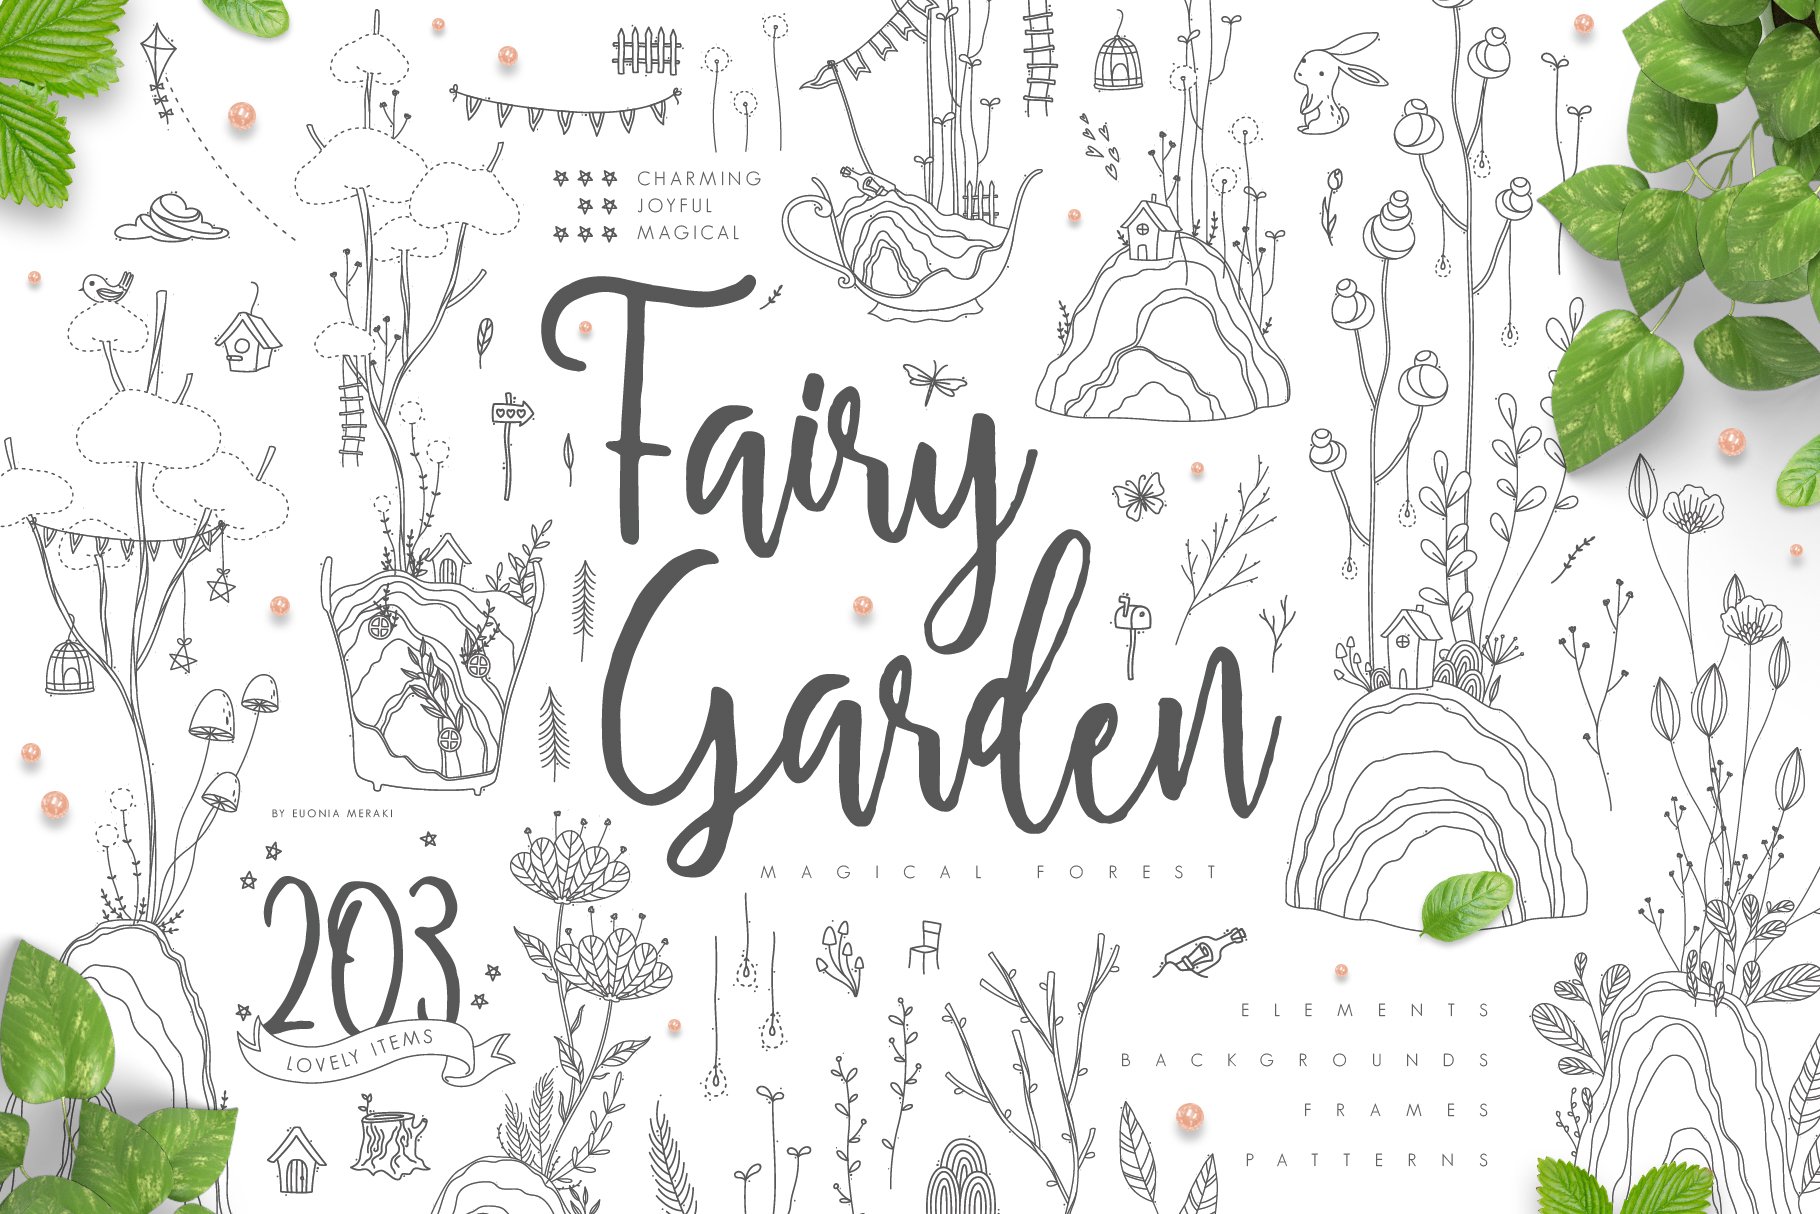 Fairy Garden - Magical Forest Illustrations